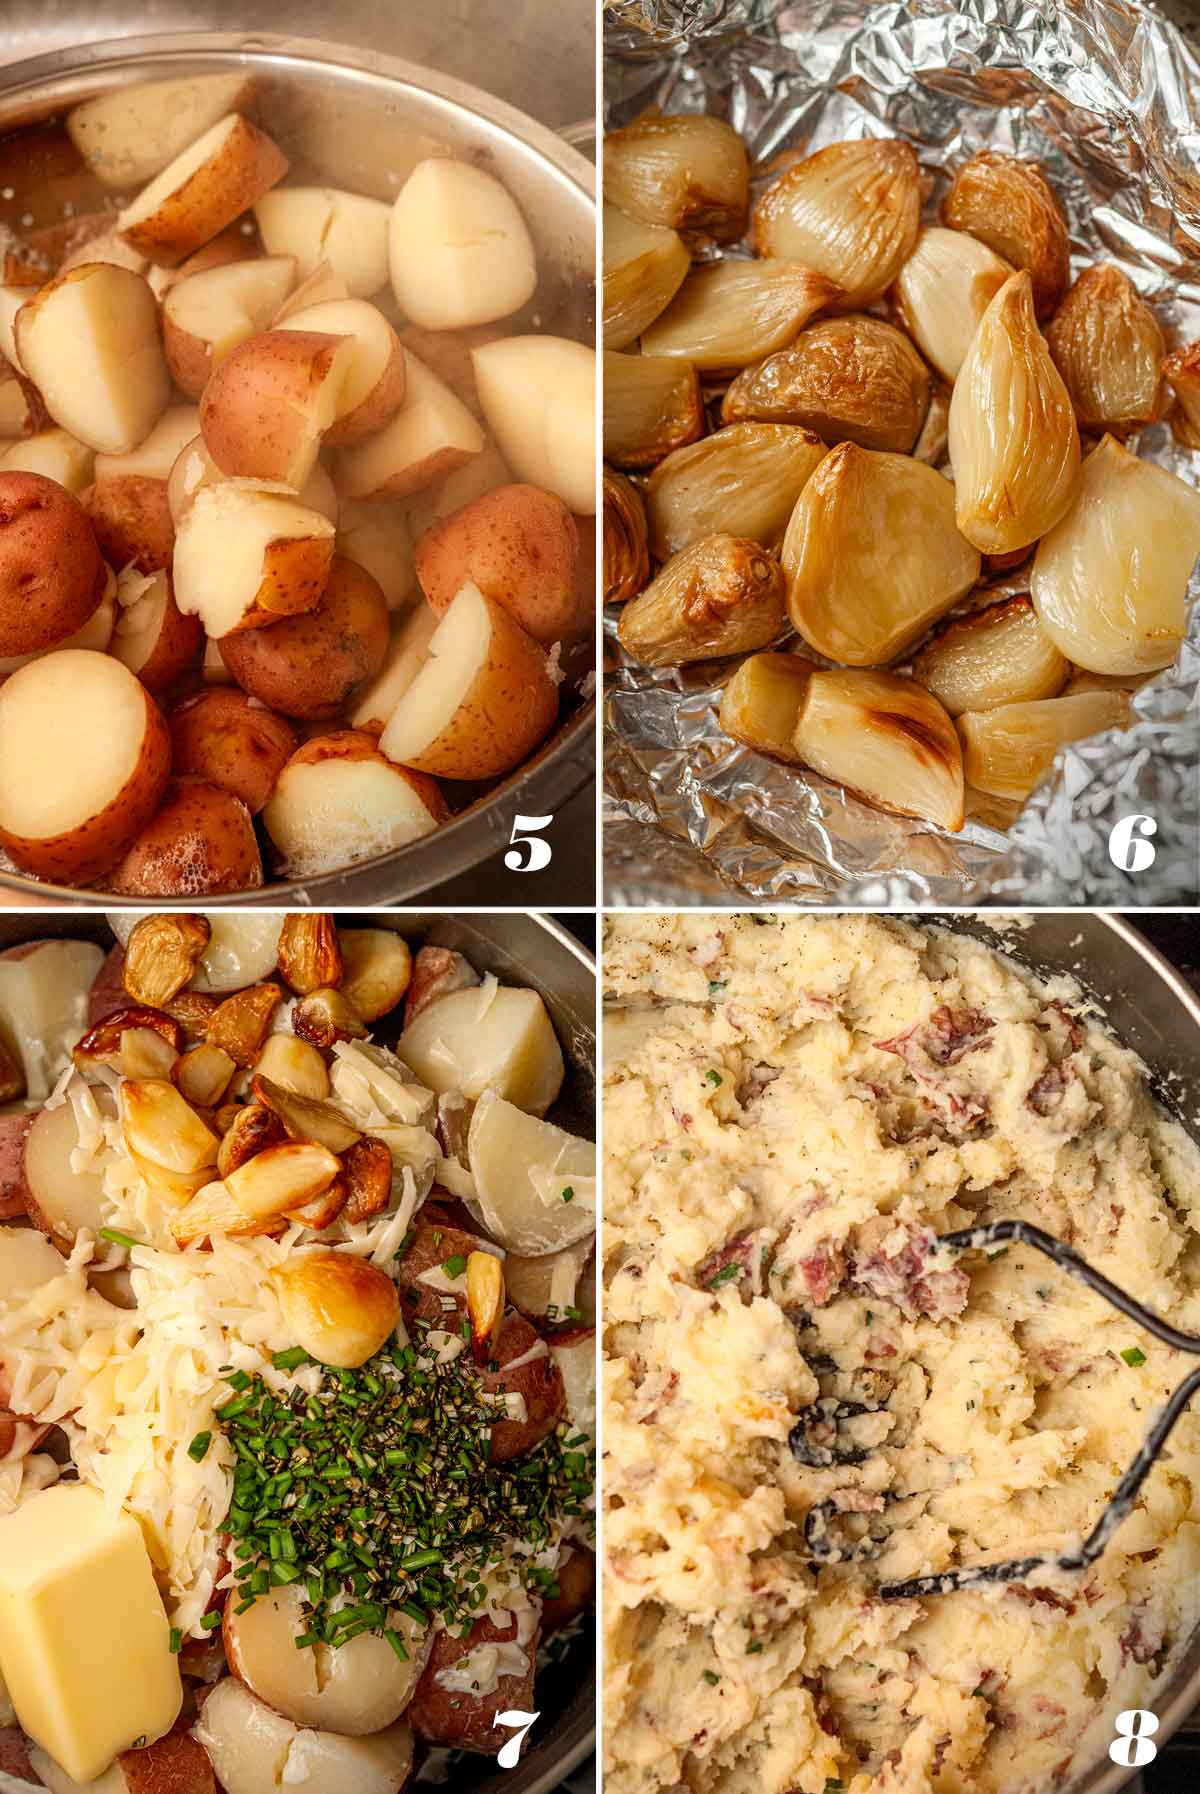 A collage of 4 numbered images showing how to create mashed potatoes.